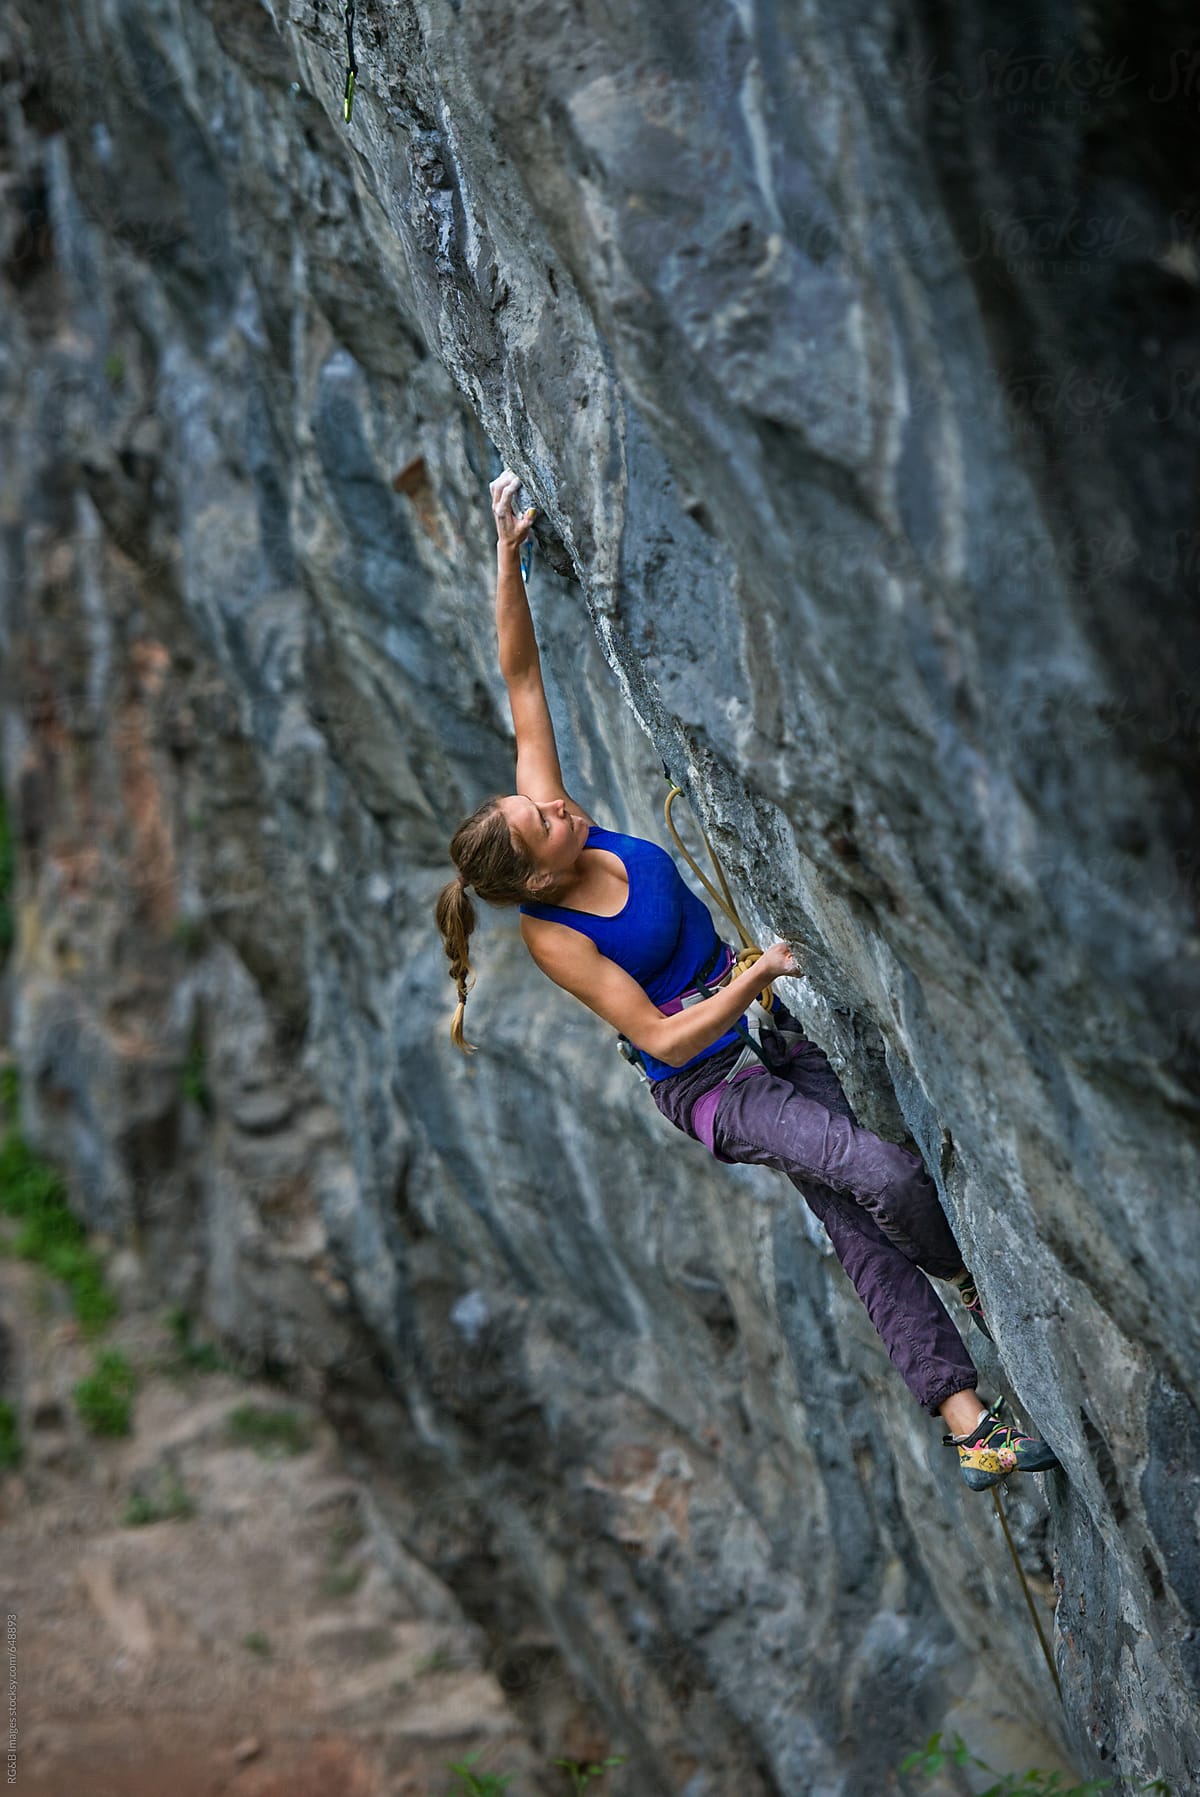 Female climber stretching to reach a hand hold